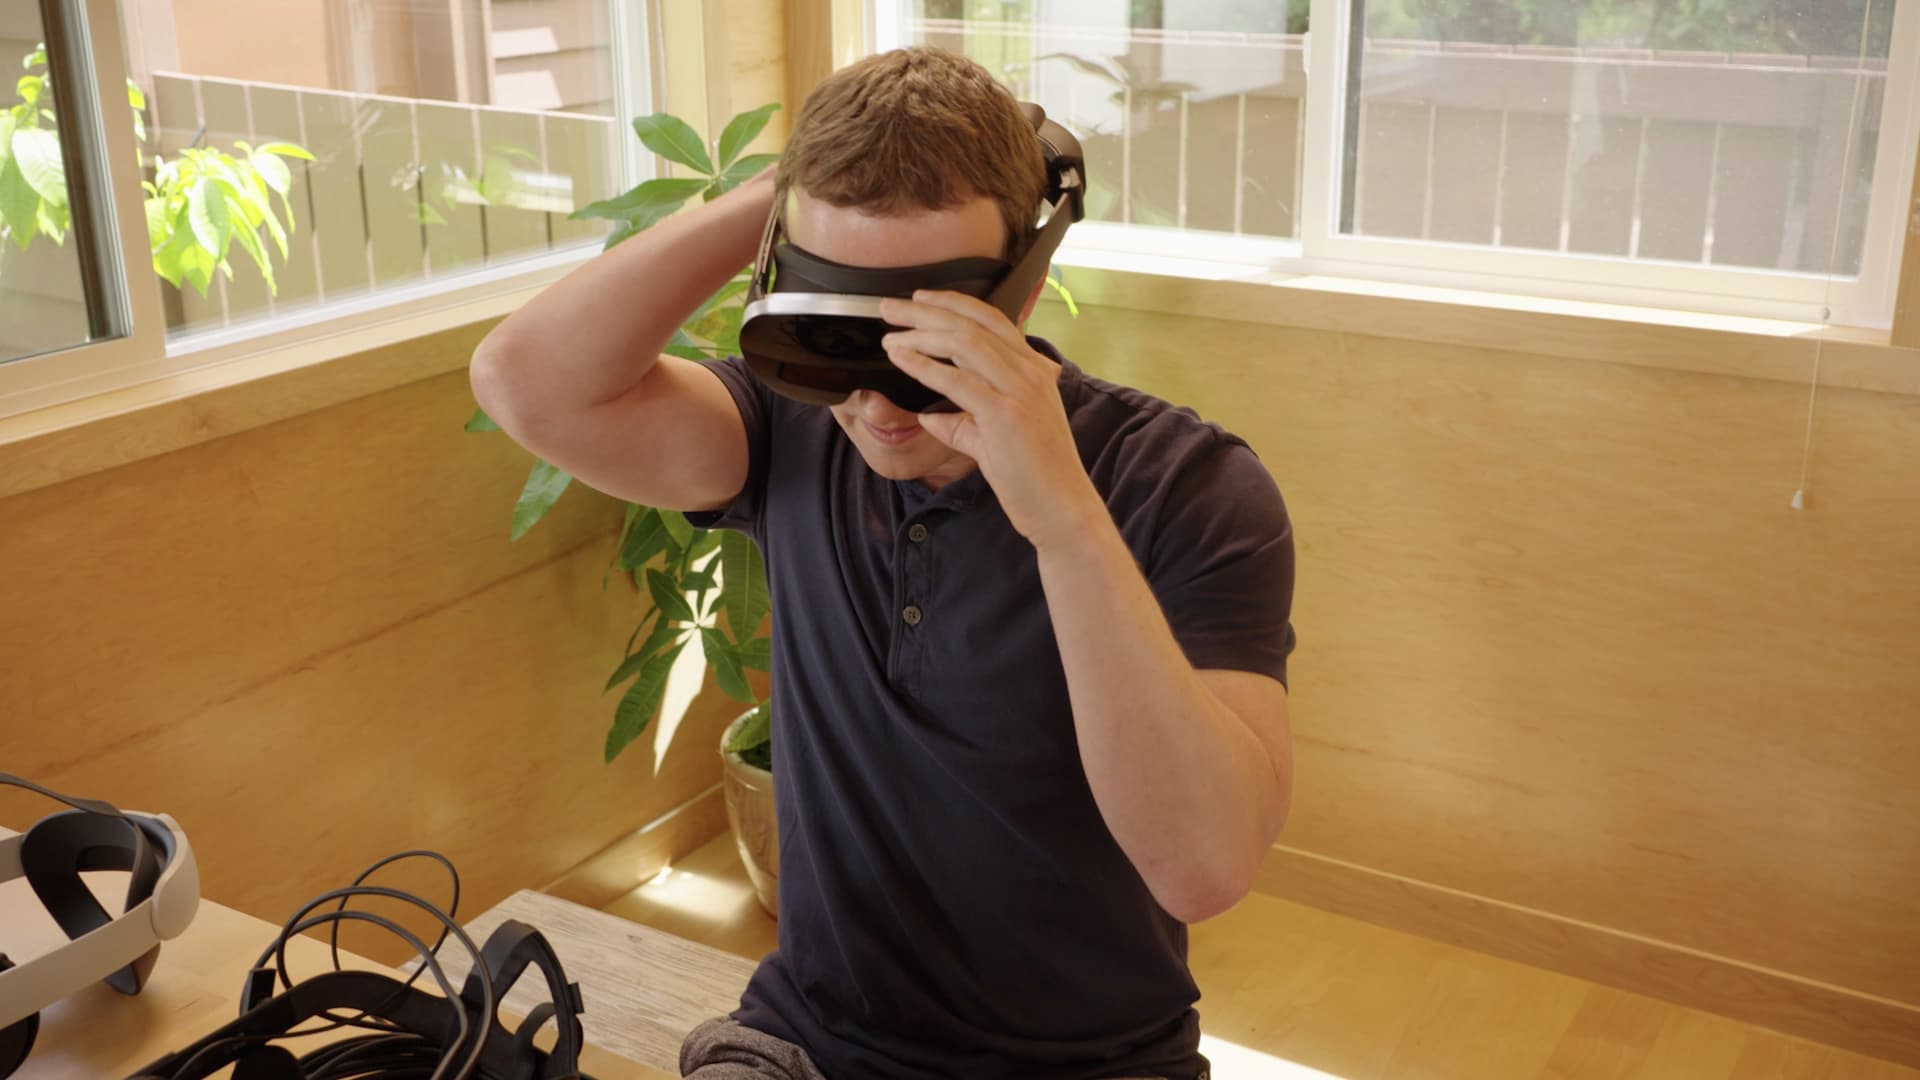 Mark Zuckerberg showed these prototype headsets to build support for his $10 bil..